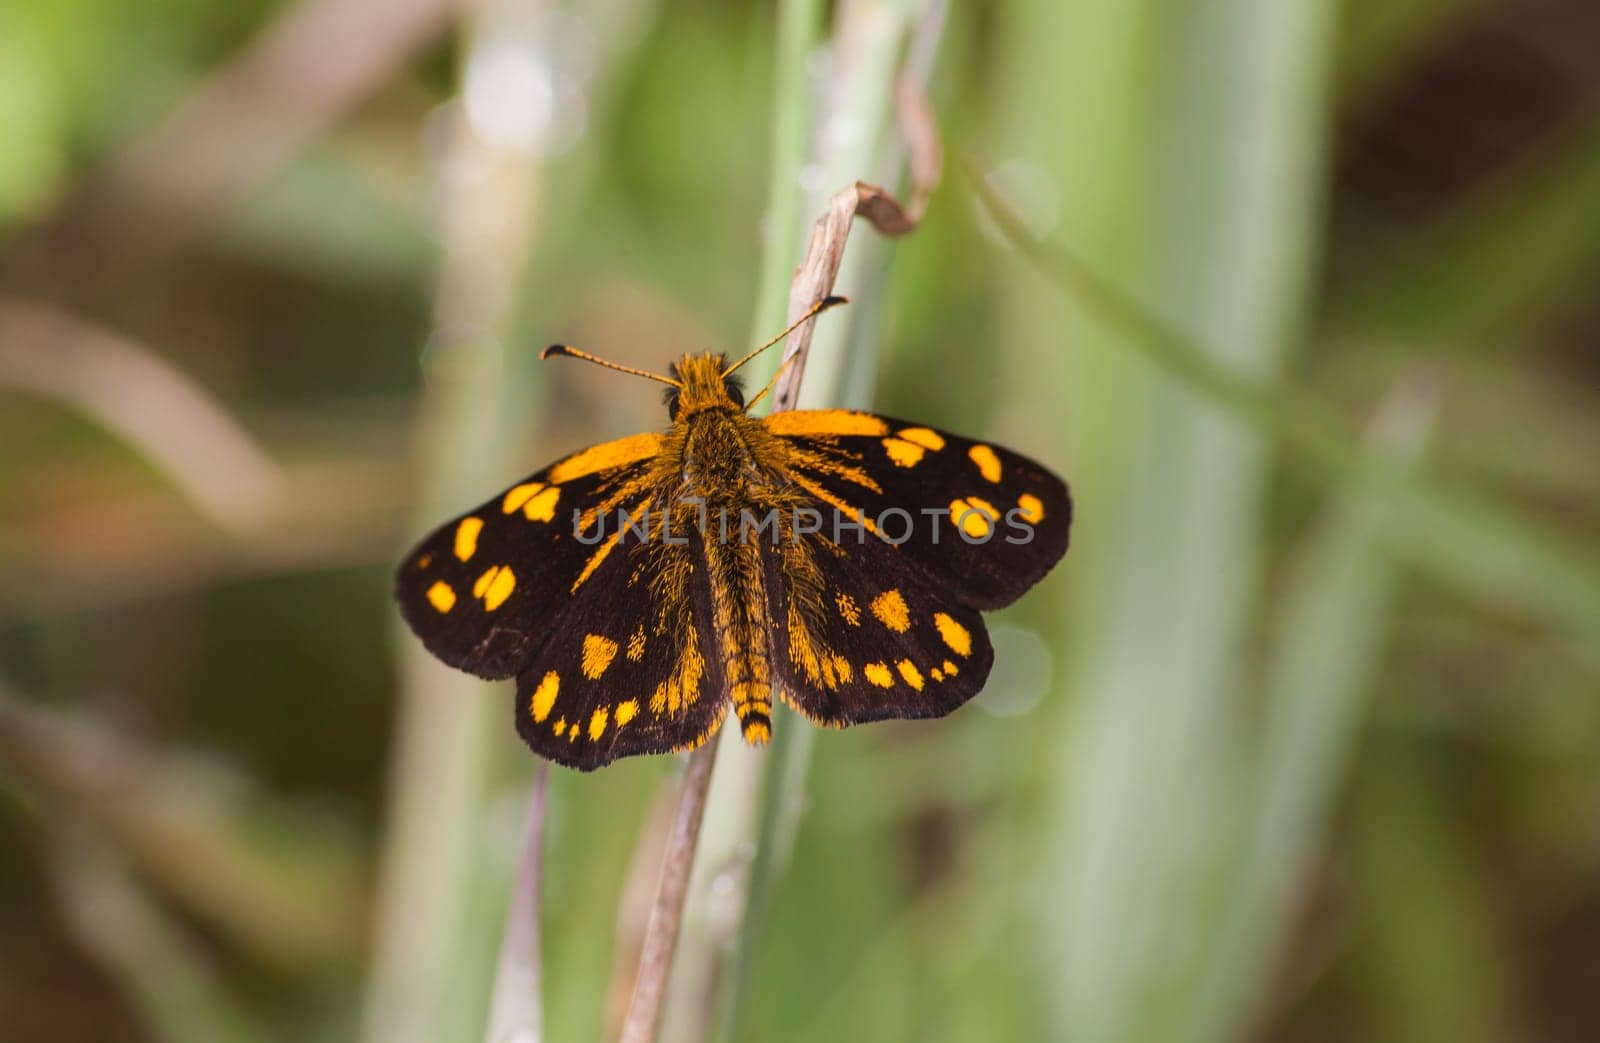 Gold Spotted Sylph (Metisella metis) 14098 by kobus_peche